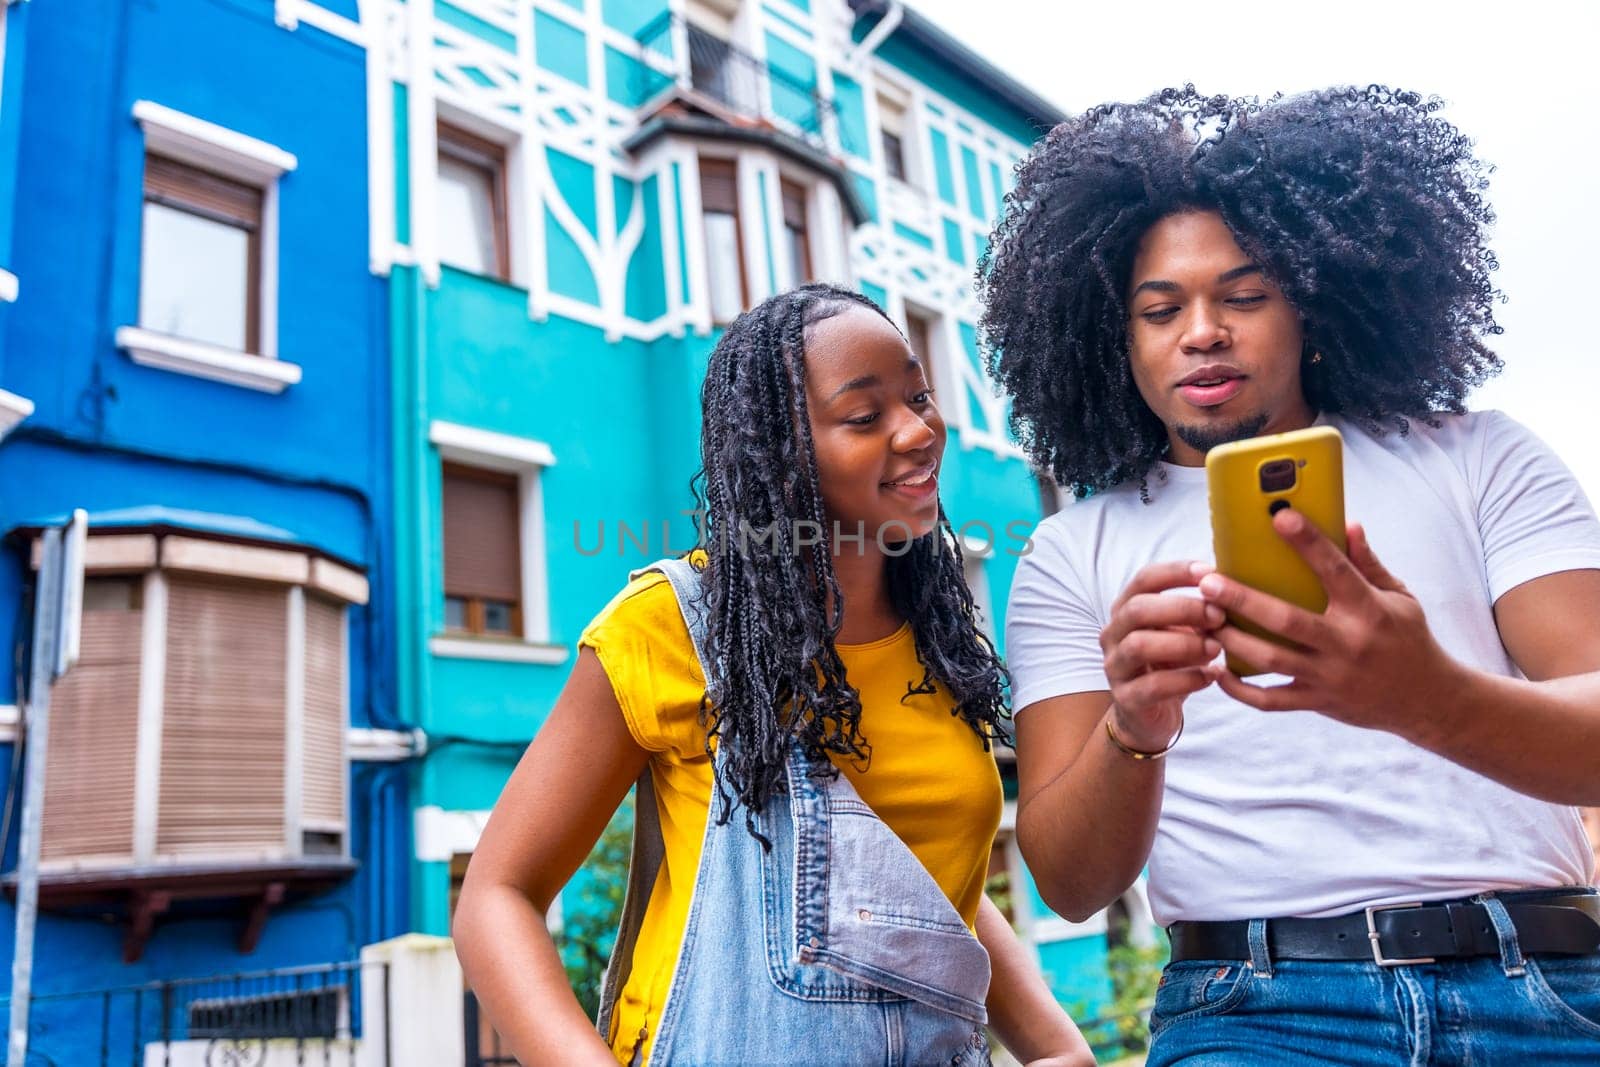 African couple looking for directions with the mobile exploring a city with colorful facades